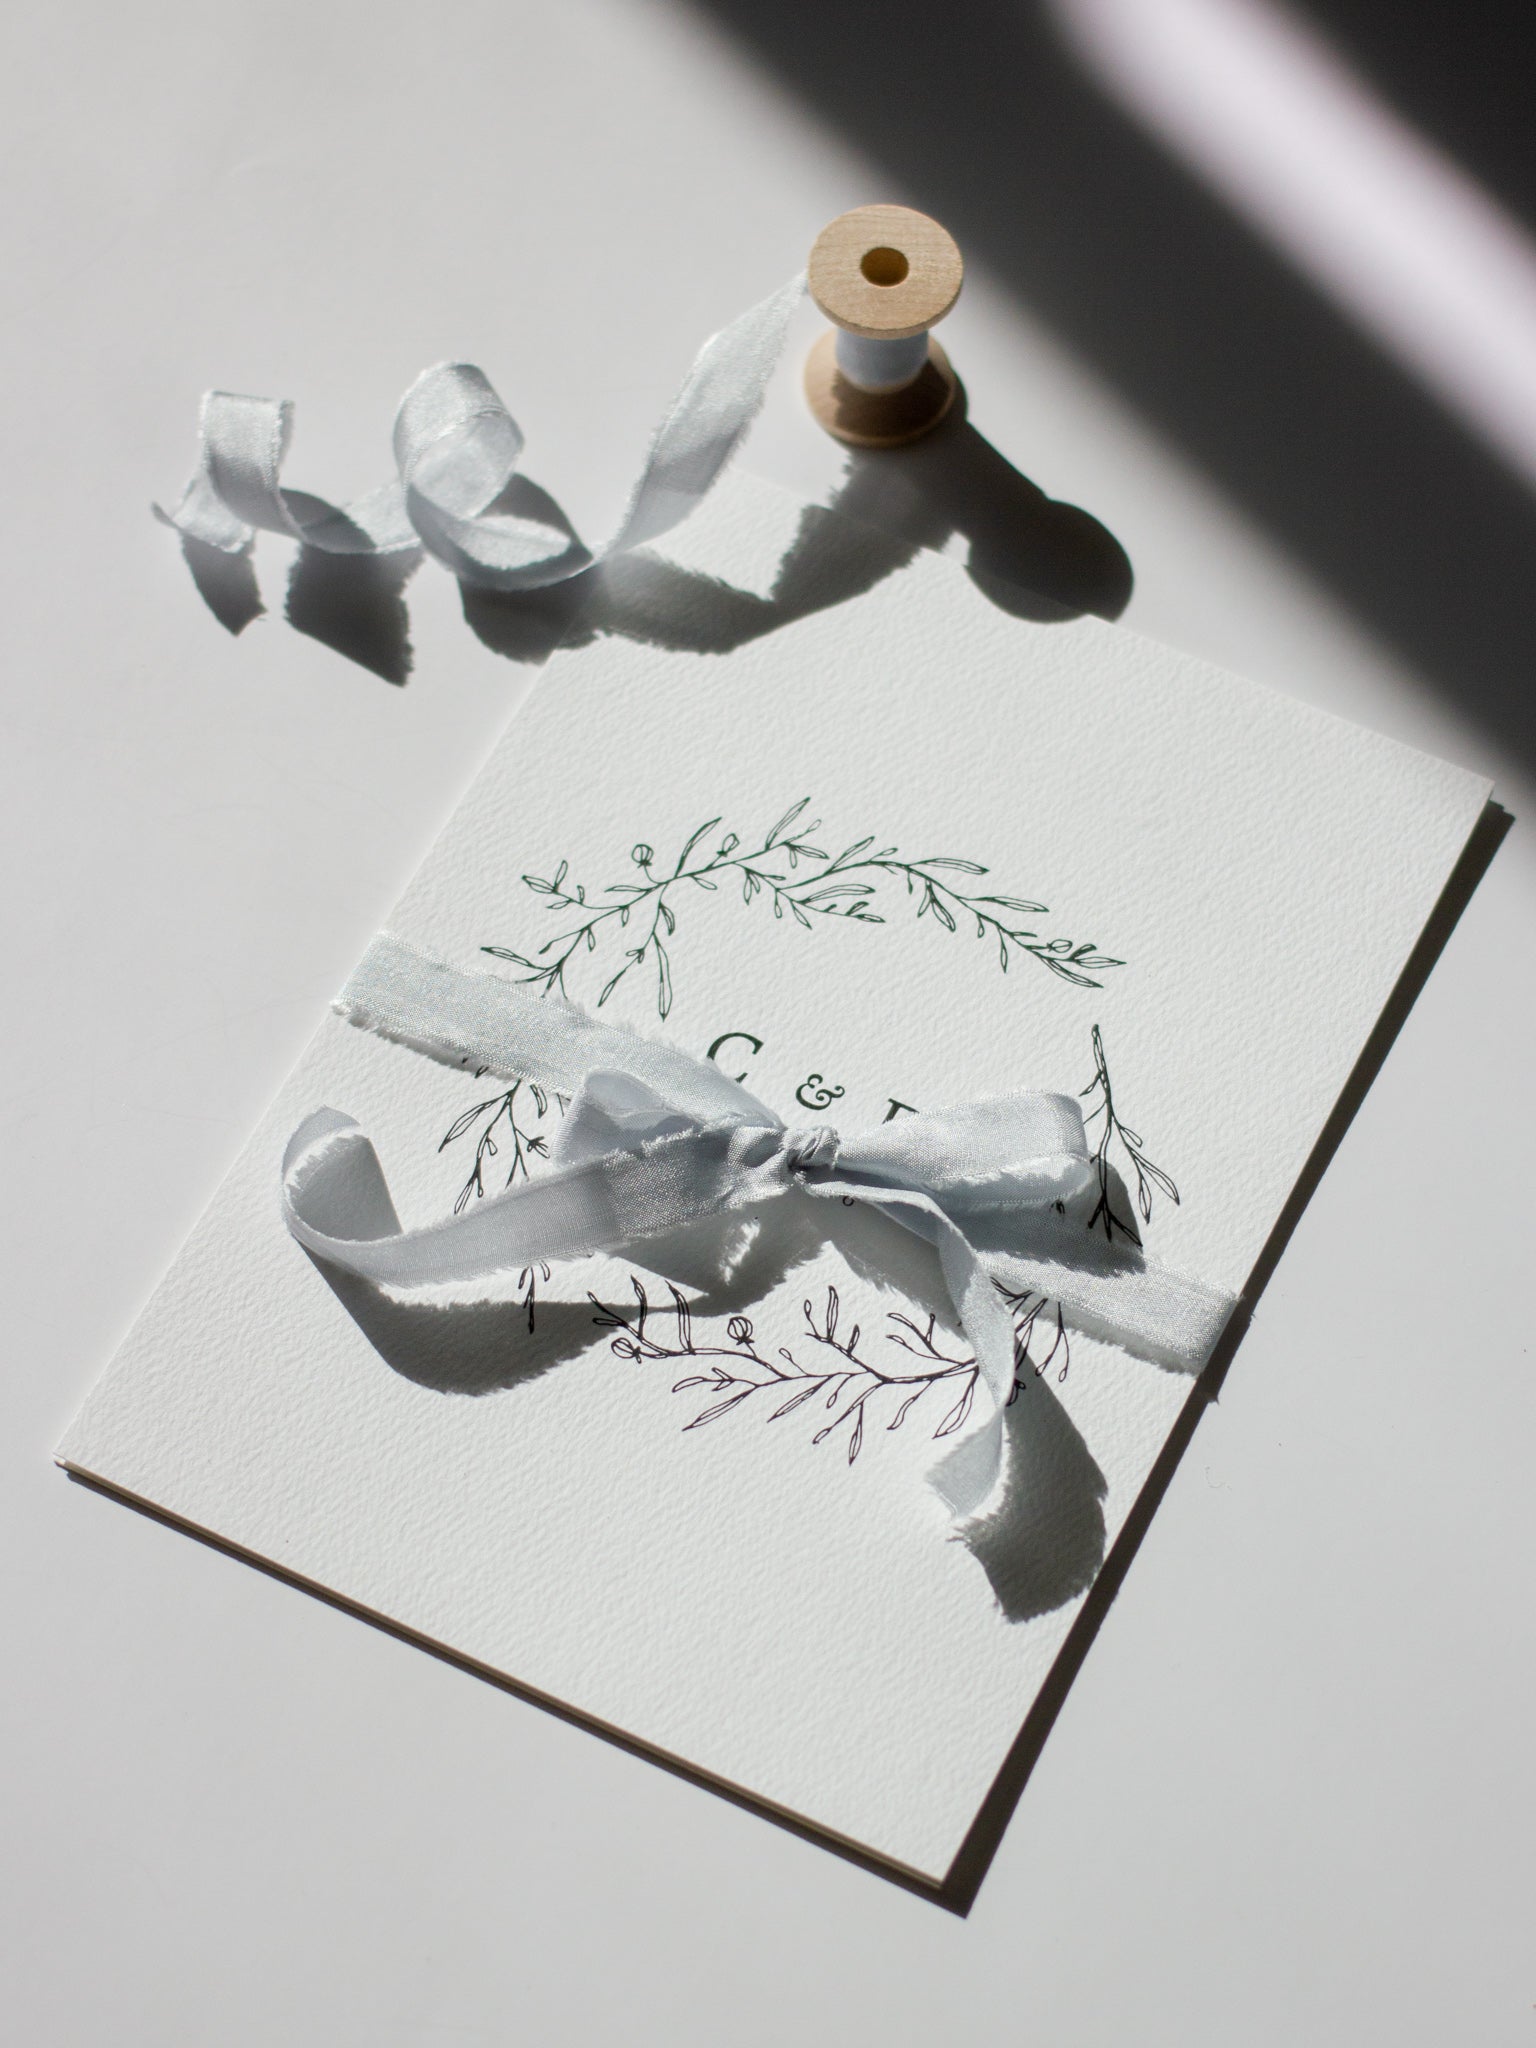 Minimalistic rustic wedding invitations with silk ribbon by Papelu Studio from Vancouver, British Columbia.